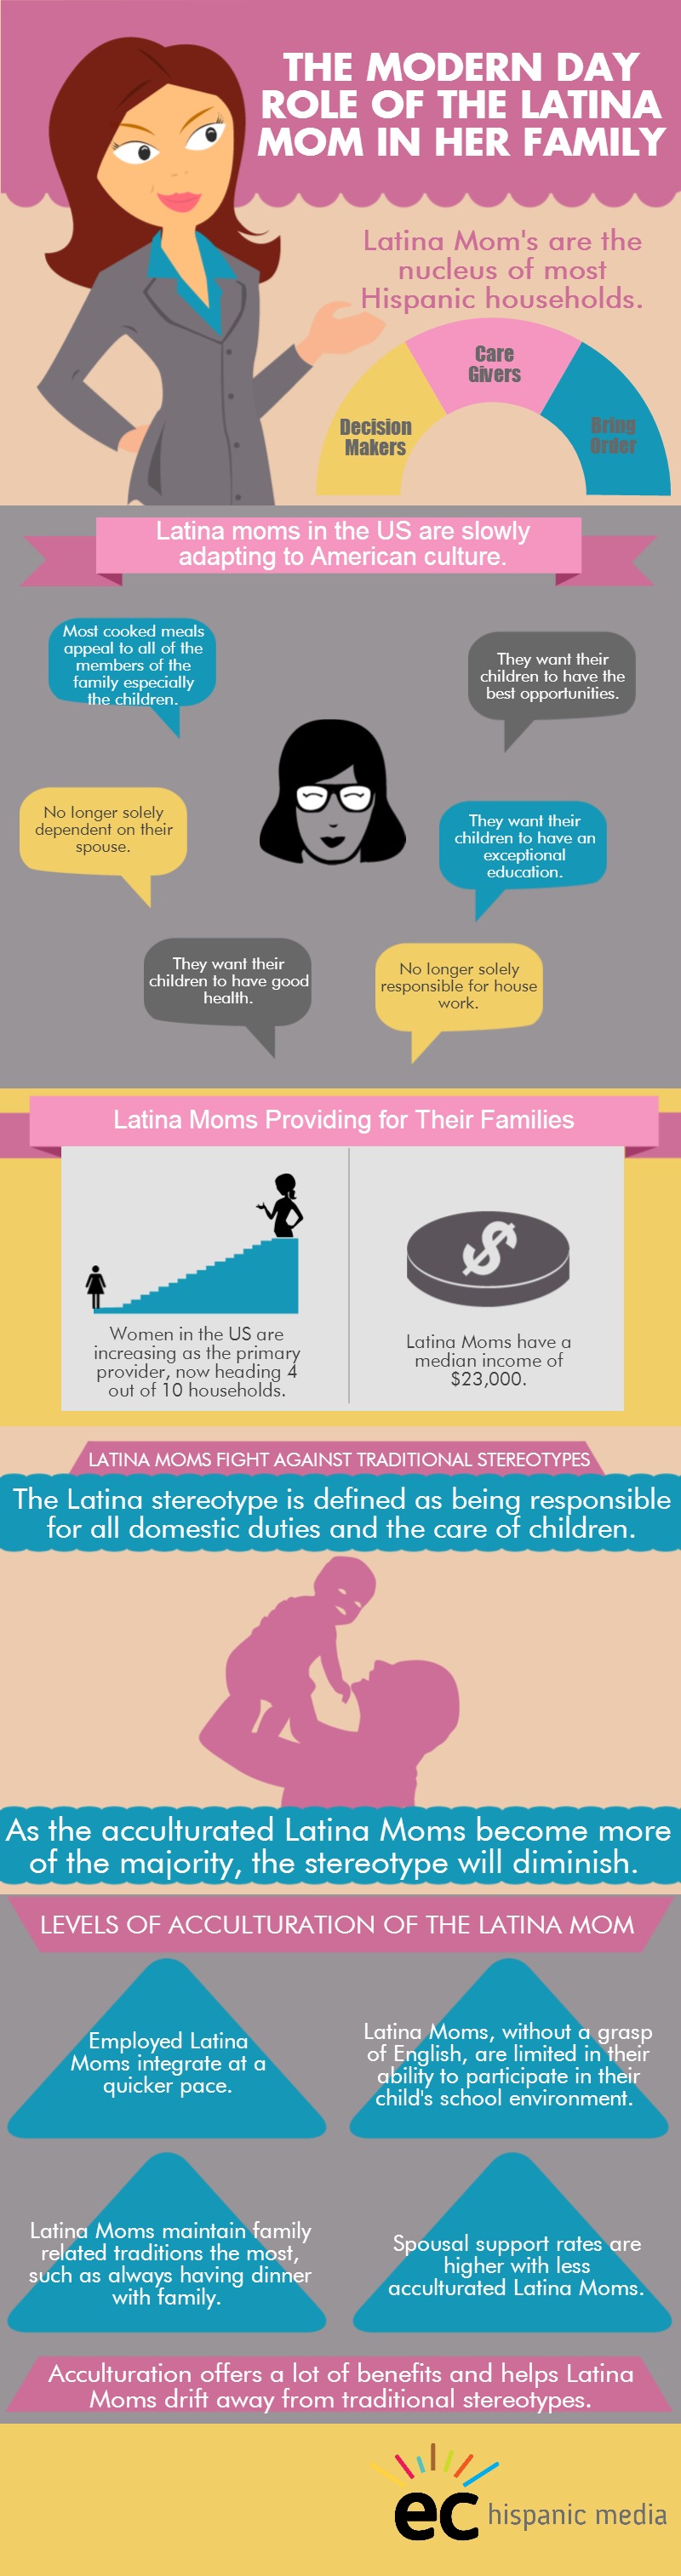 Latina Moms Acculturation Modern Family Role